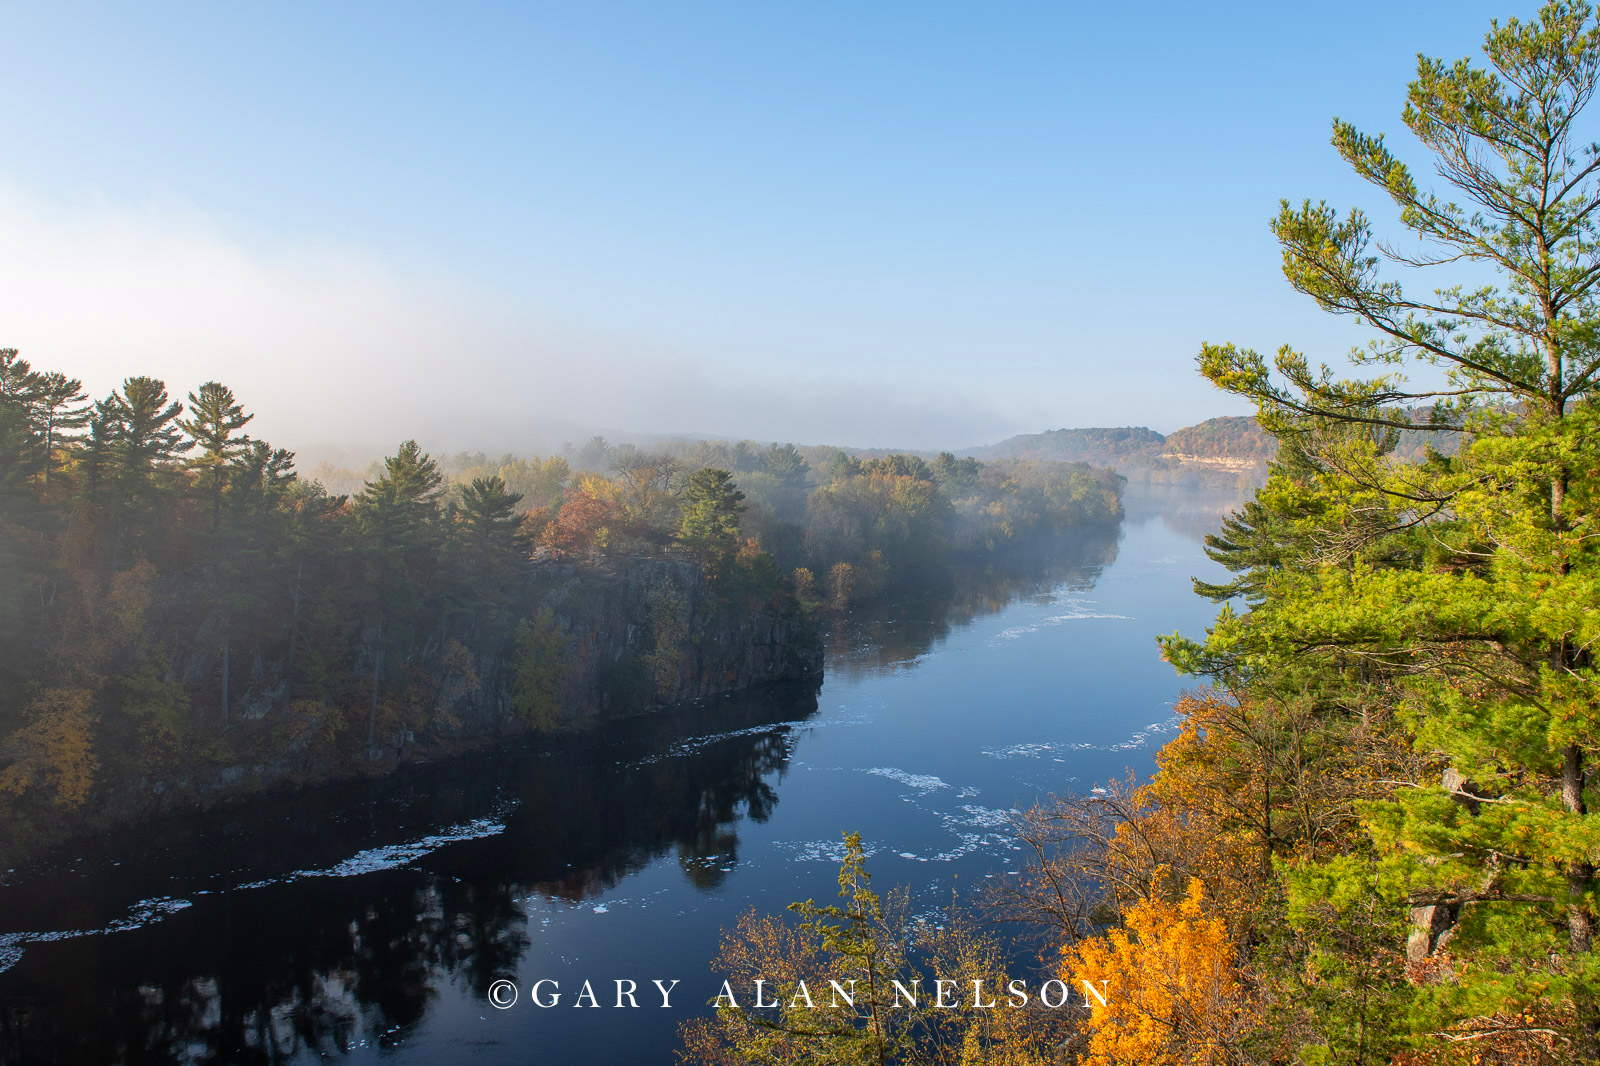 Sunrise, autum and fog over the St. Croix River, St. Croix National and Scenic River, Minnesota/Wisconsin